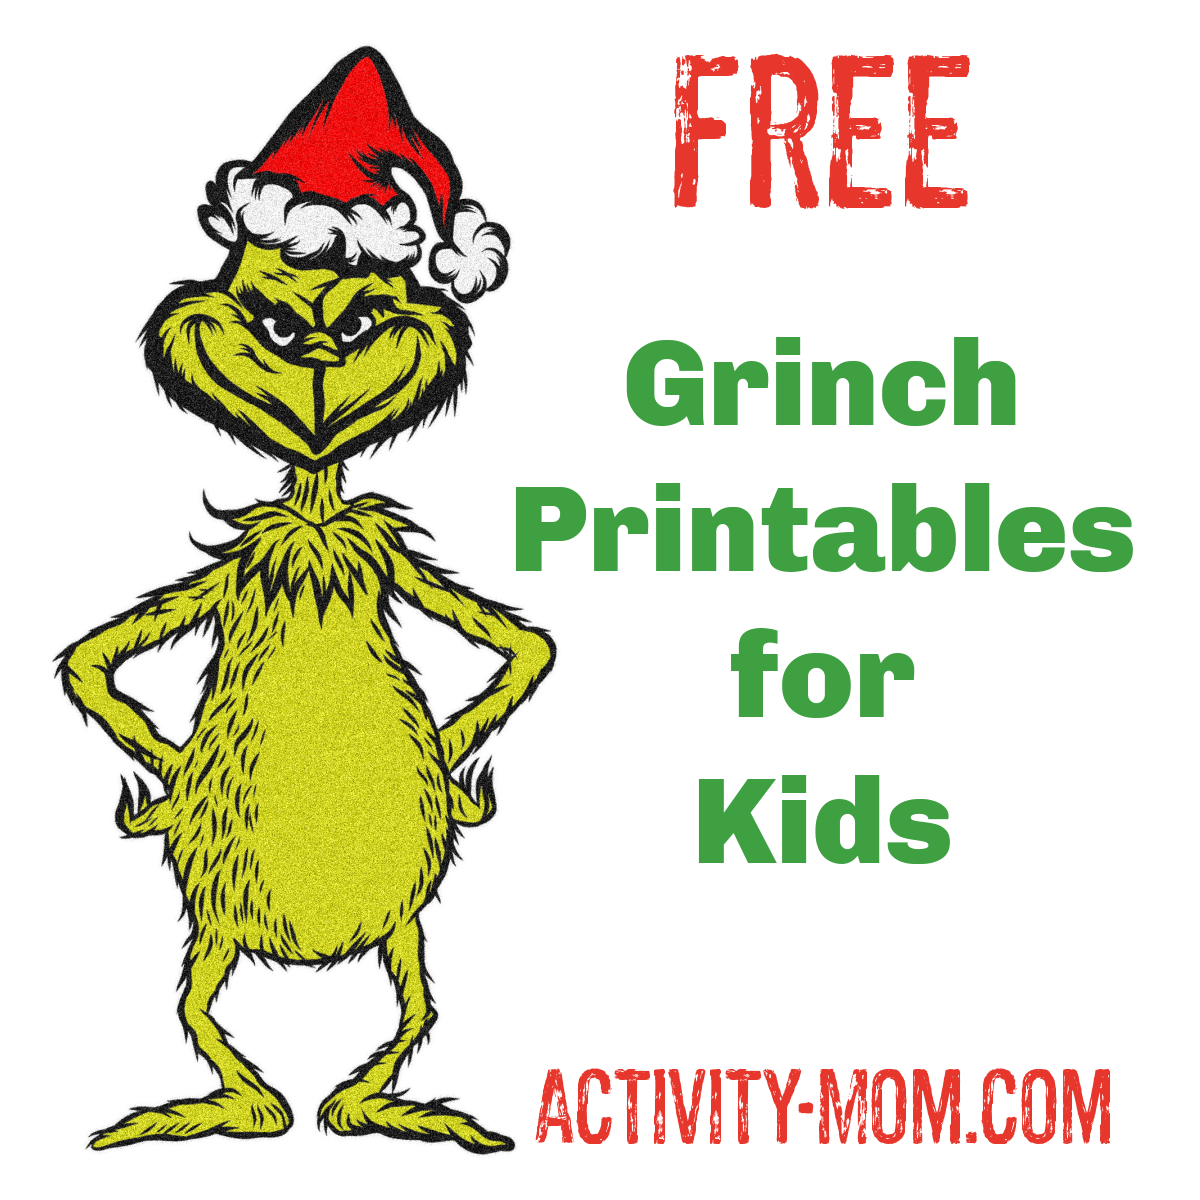 Free Grinch Printable Activities For Kids - The Activity Mom intended for Free Grinch Printables